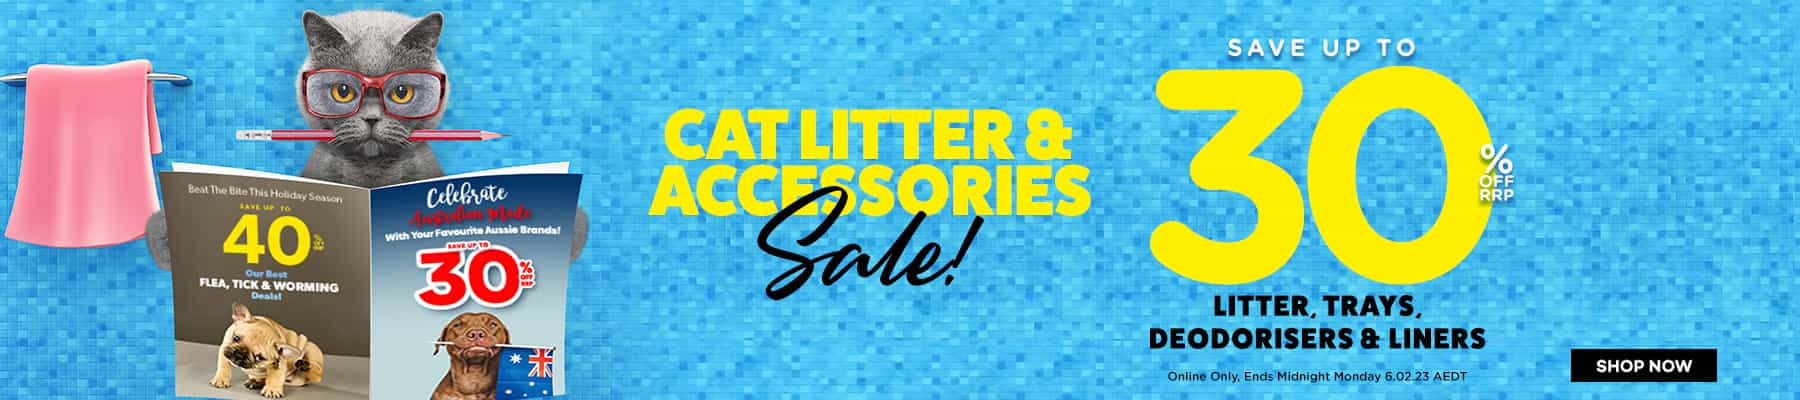 Save up to 30% OFF RRP Litter, Trays, Deodorisers & Liners @ Pet House